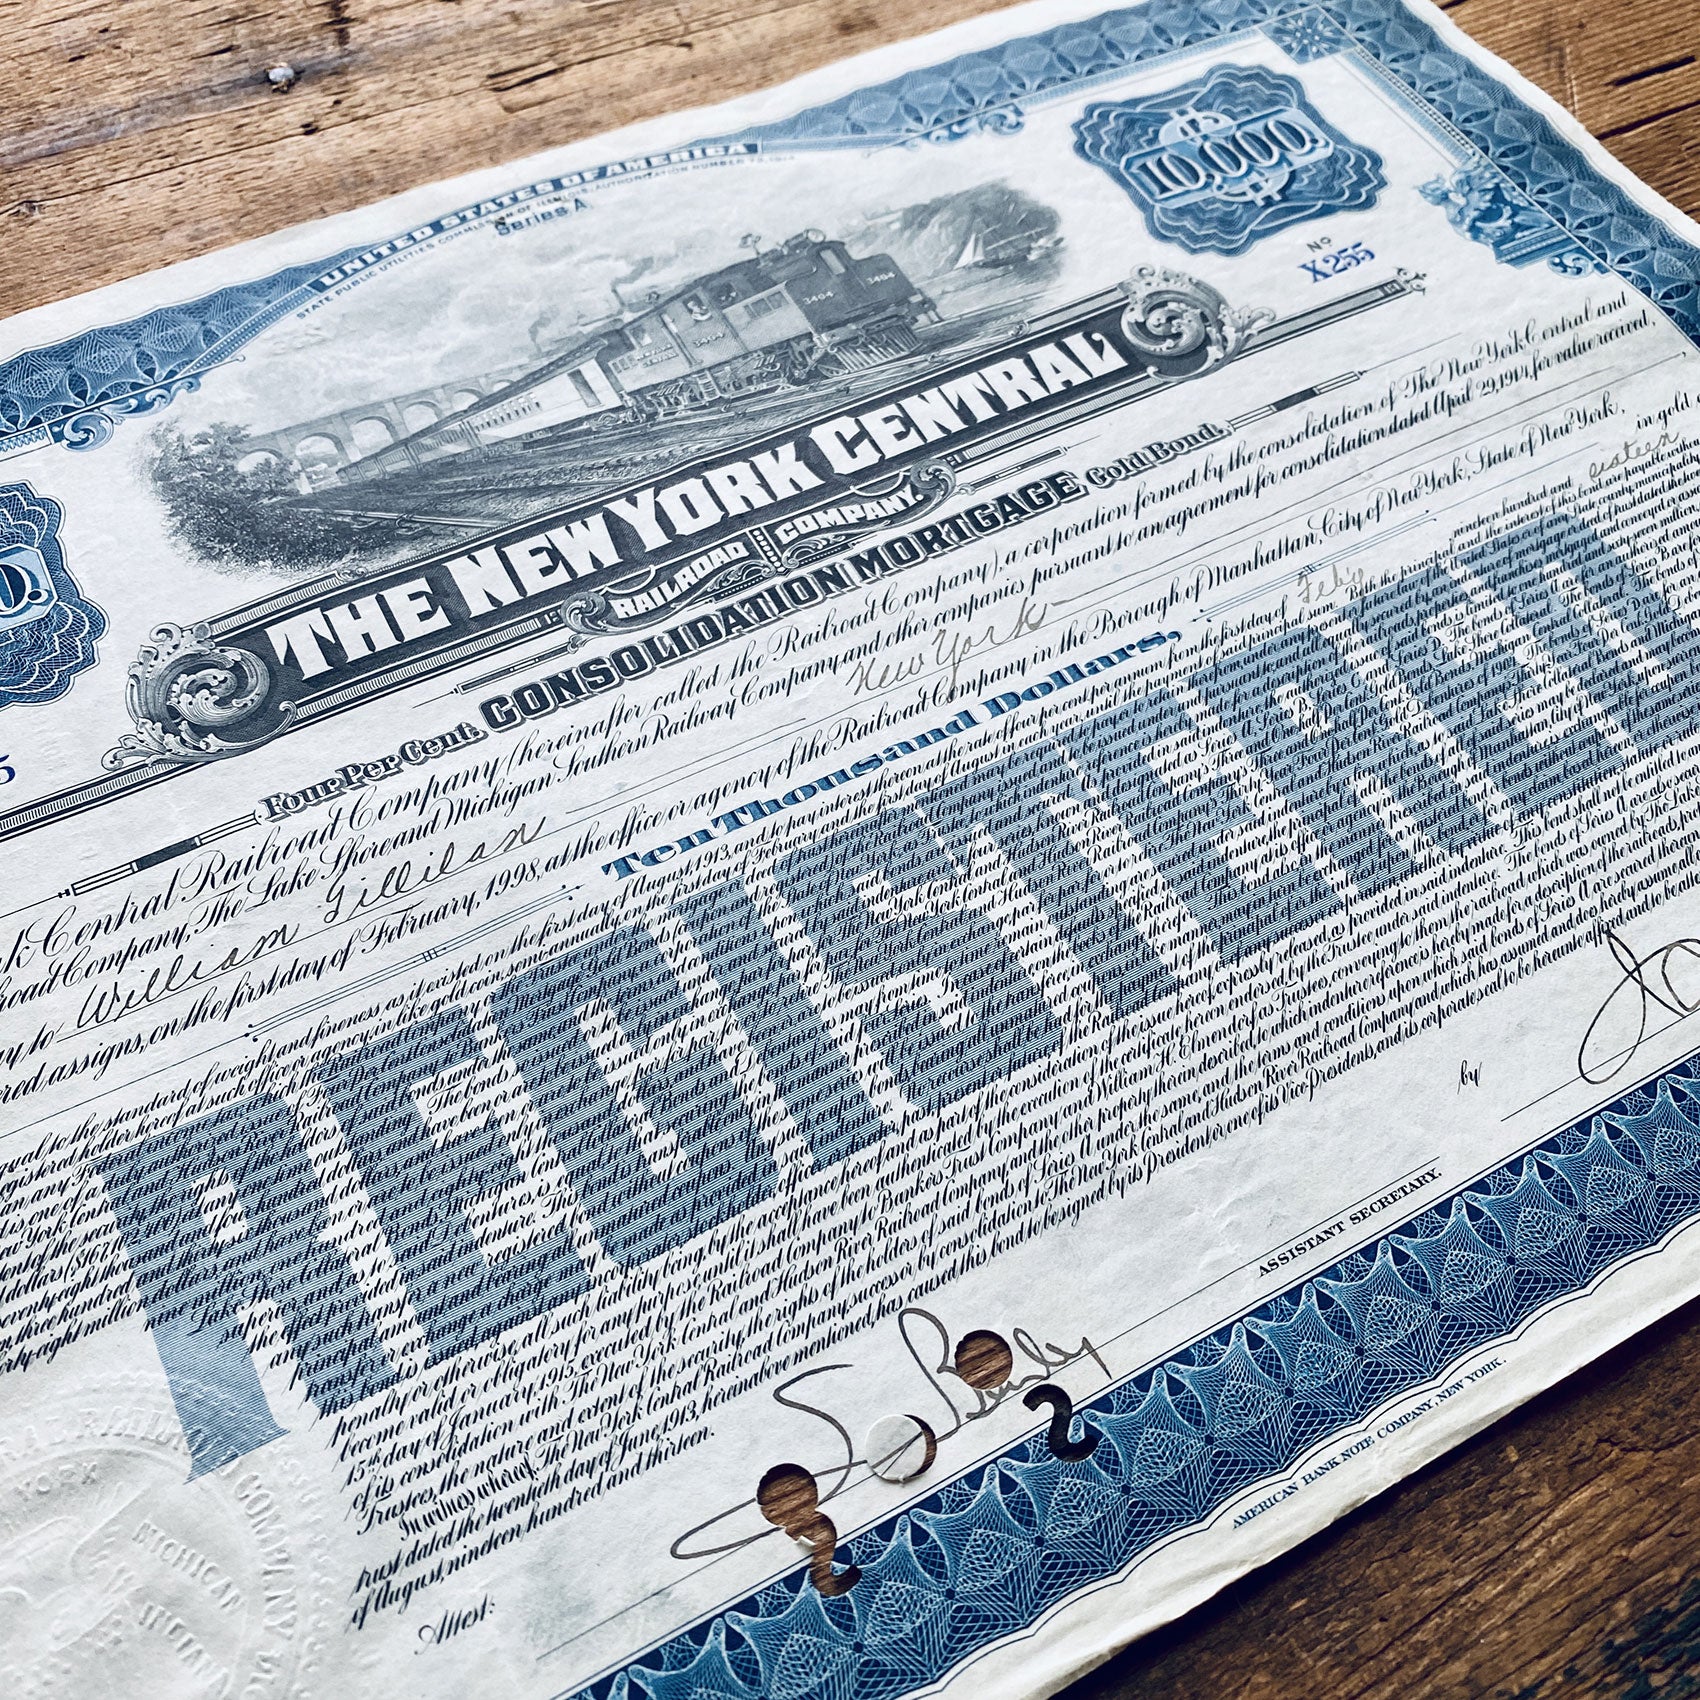 The New York Central Share Certificate - 1920s